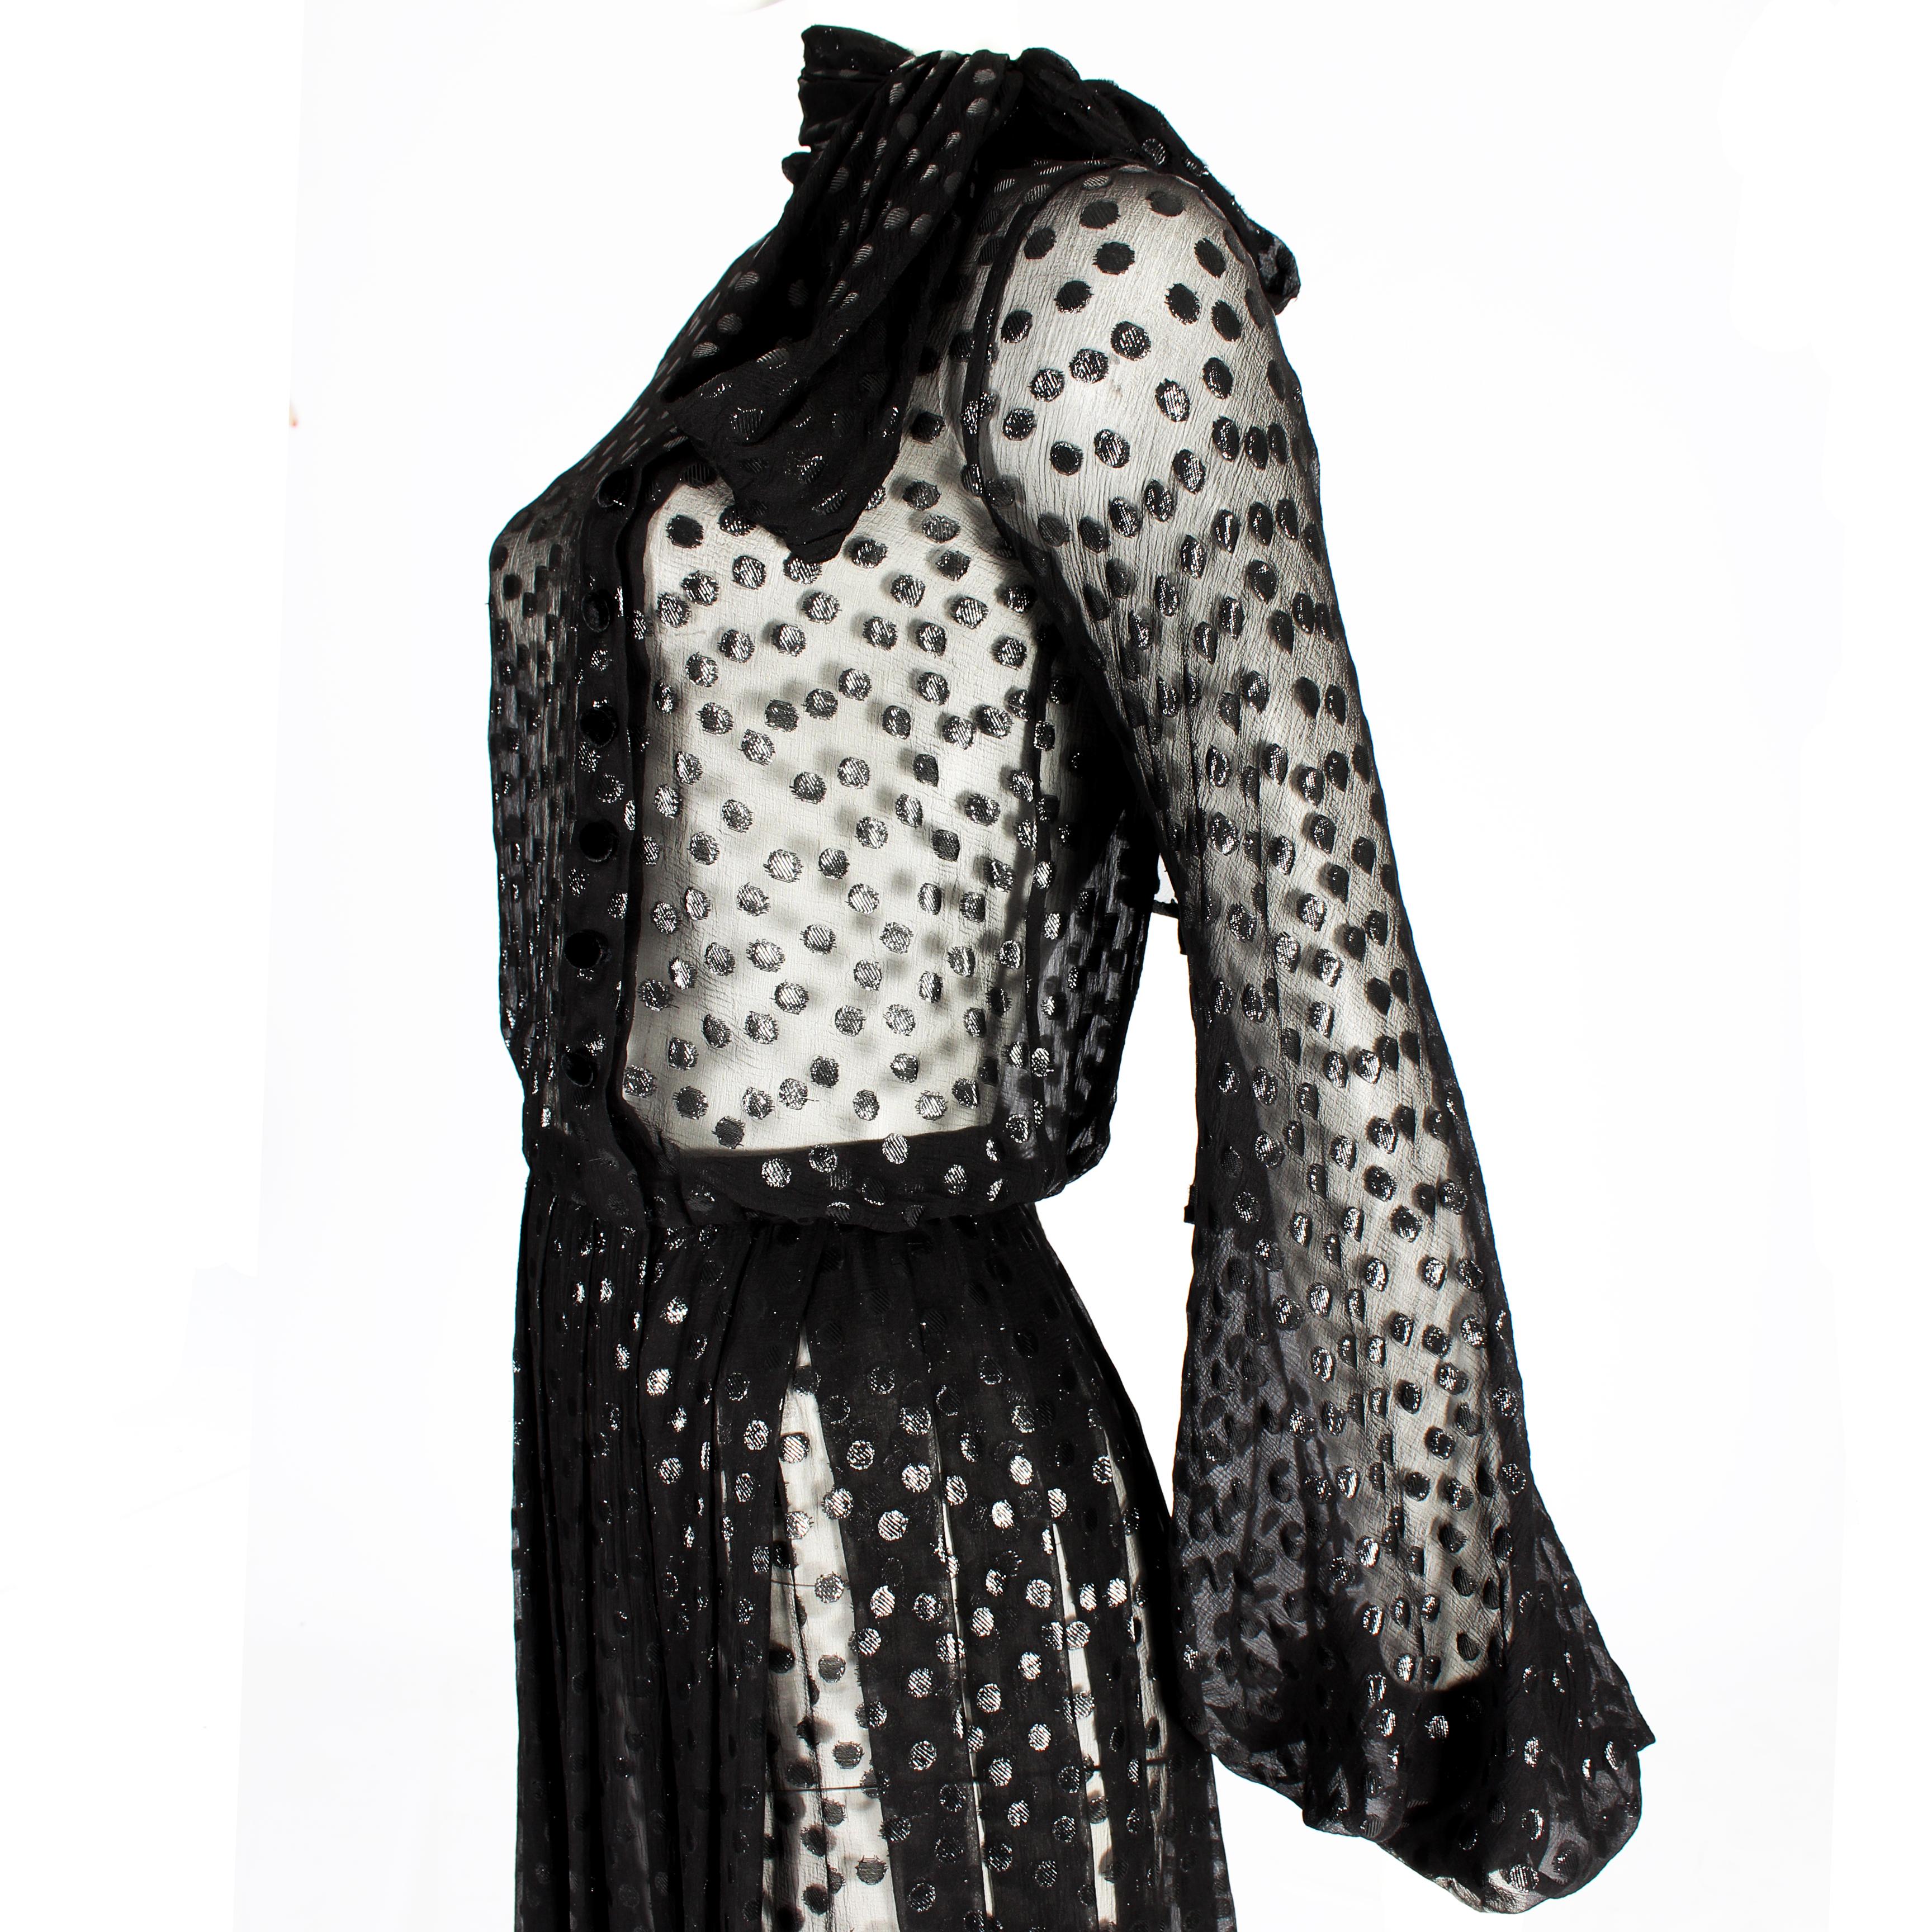 Jean-Louis Scherrer by Stéphane Rolland Haute Couture Autum / Winter 2005

- Sheer polka dots silk chiffon with black velvet covered buttons on bust and sleeves
- Victorian poet sleeve
- Pussybow detail around neck
- Ruffled bottom and pleated front